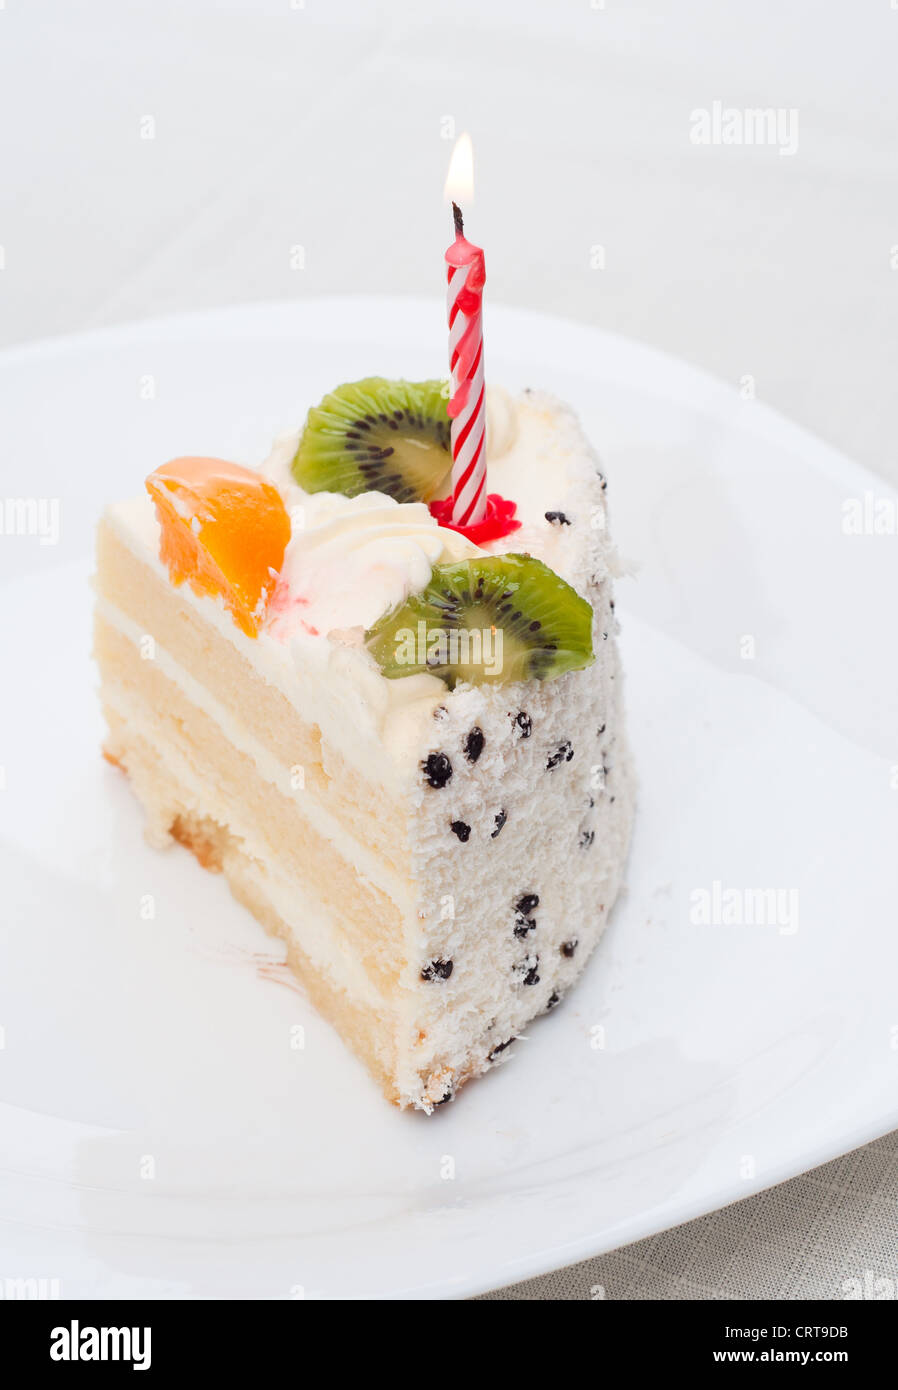 pie of torte with light on plate Stock Photo